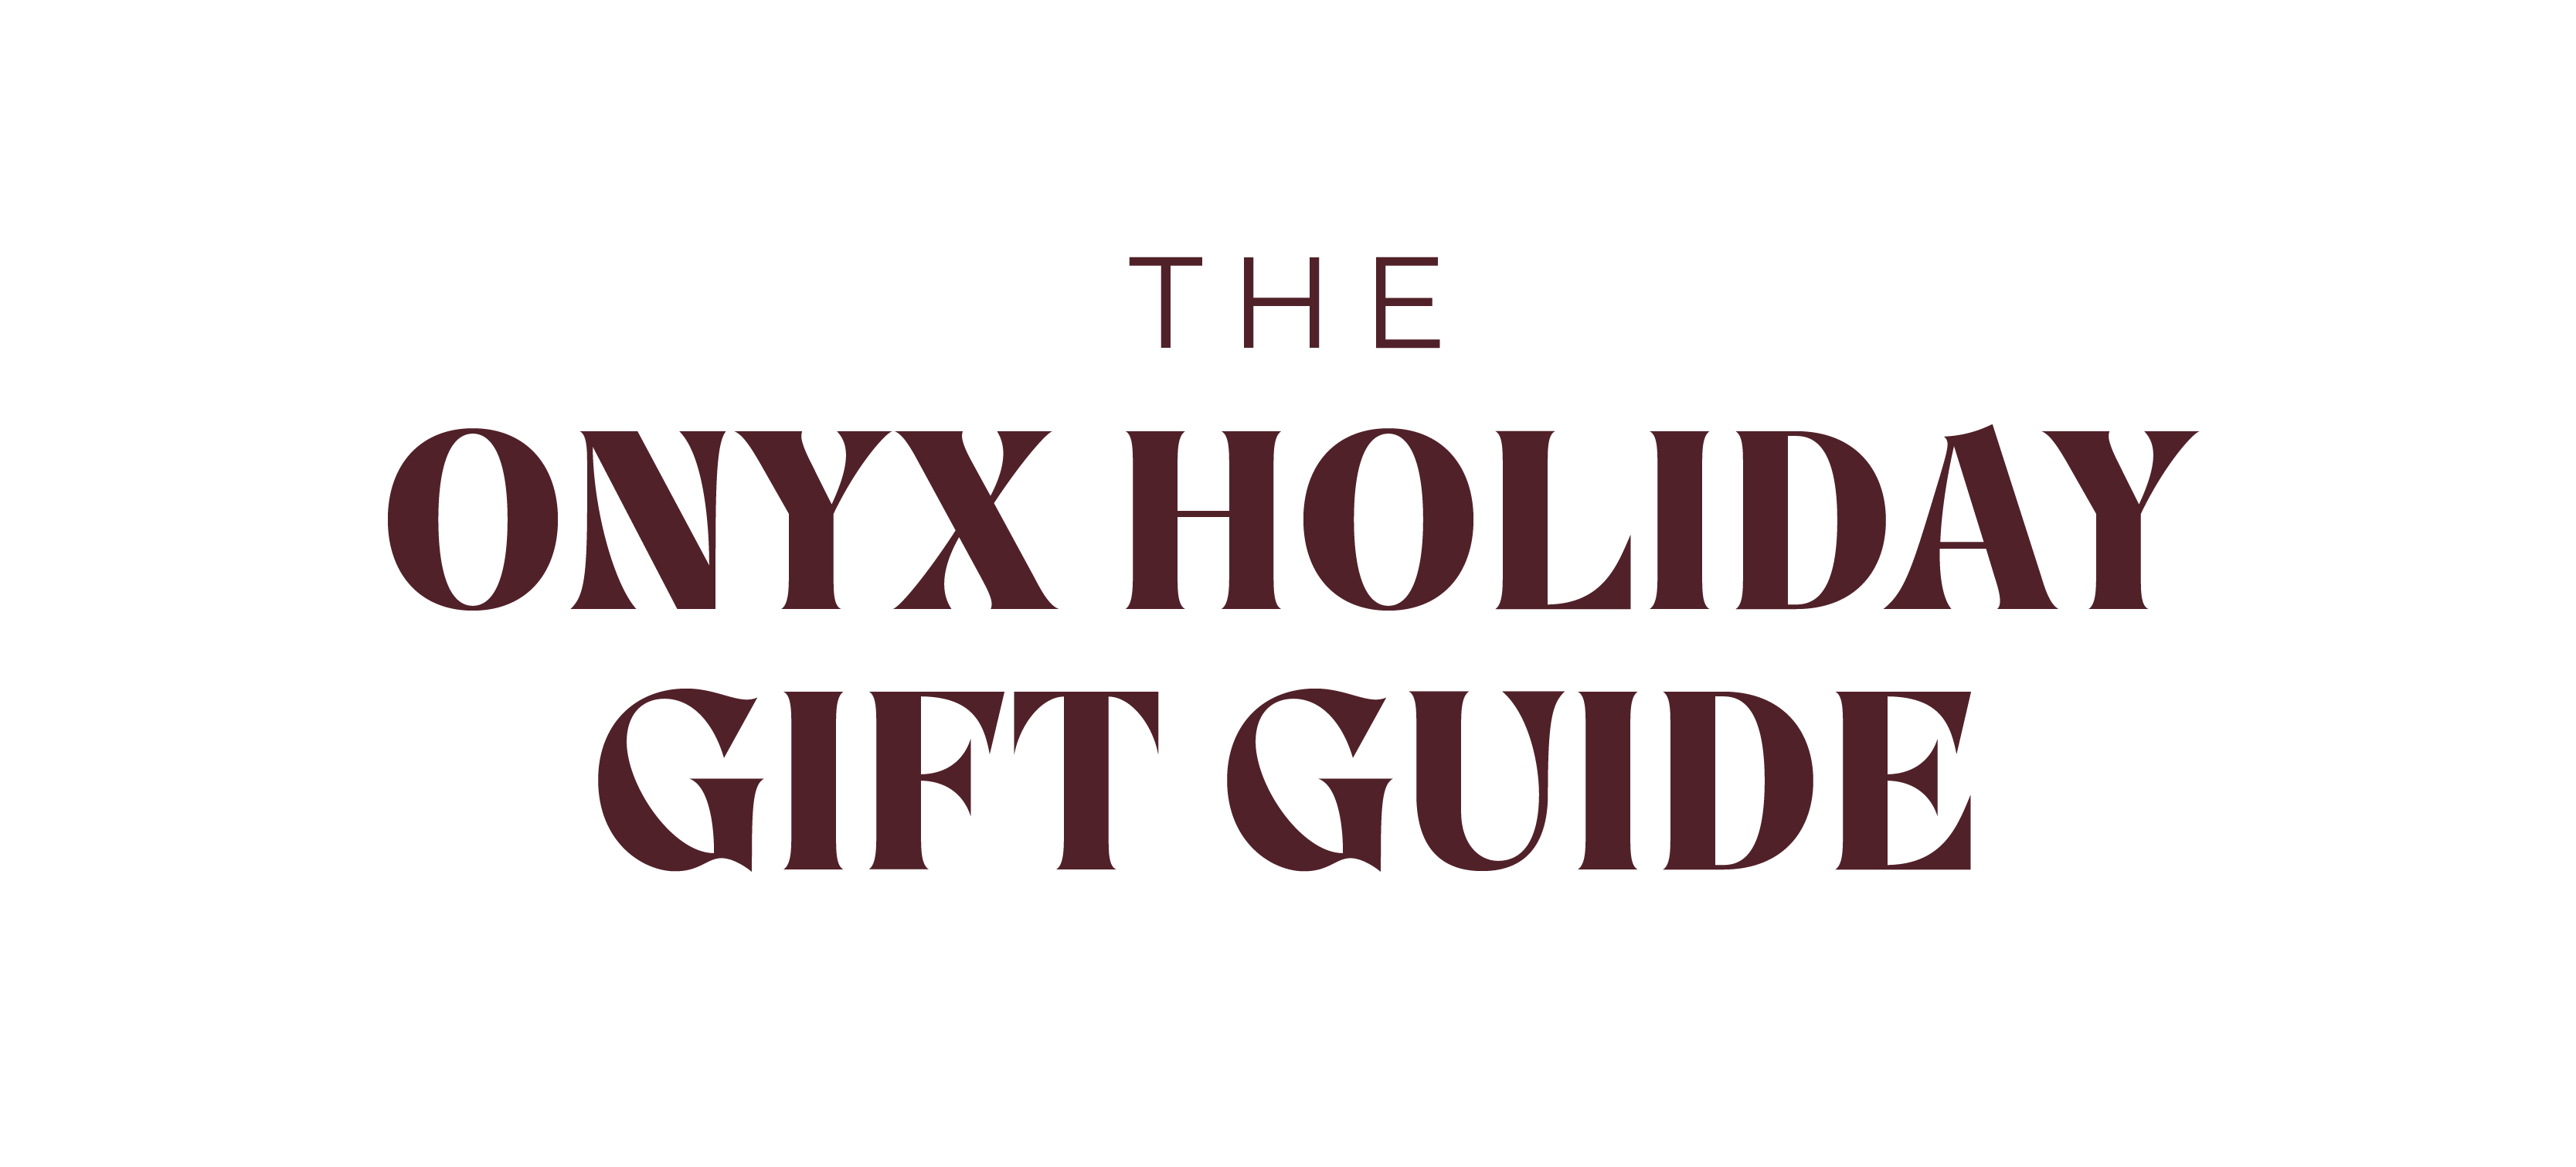 The Onyx Holiday Gift Guide